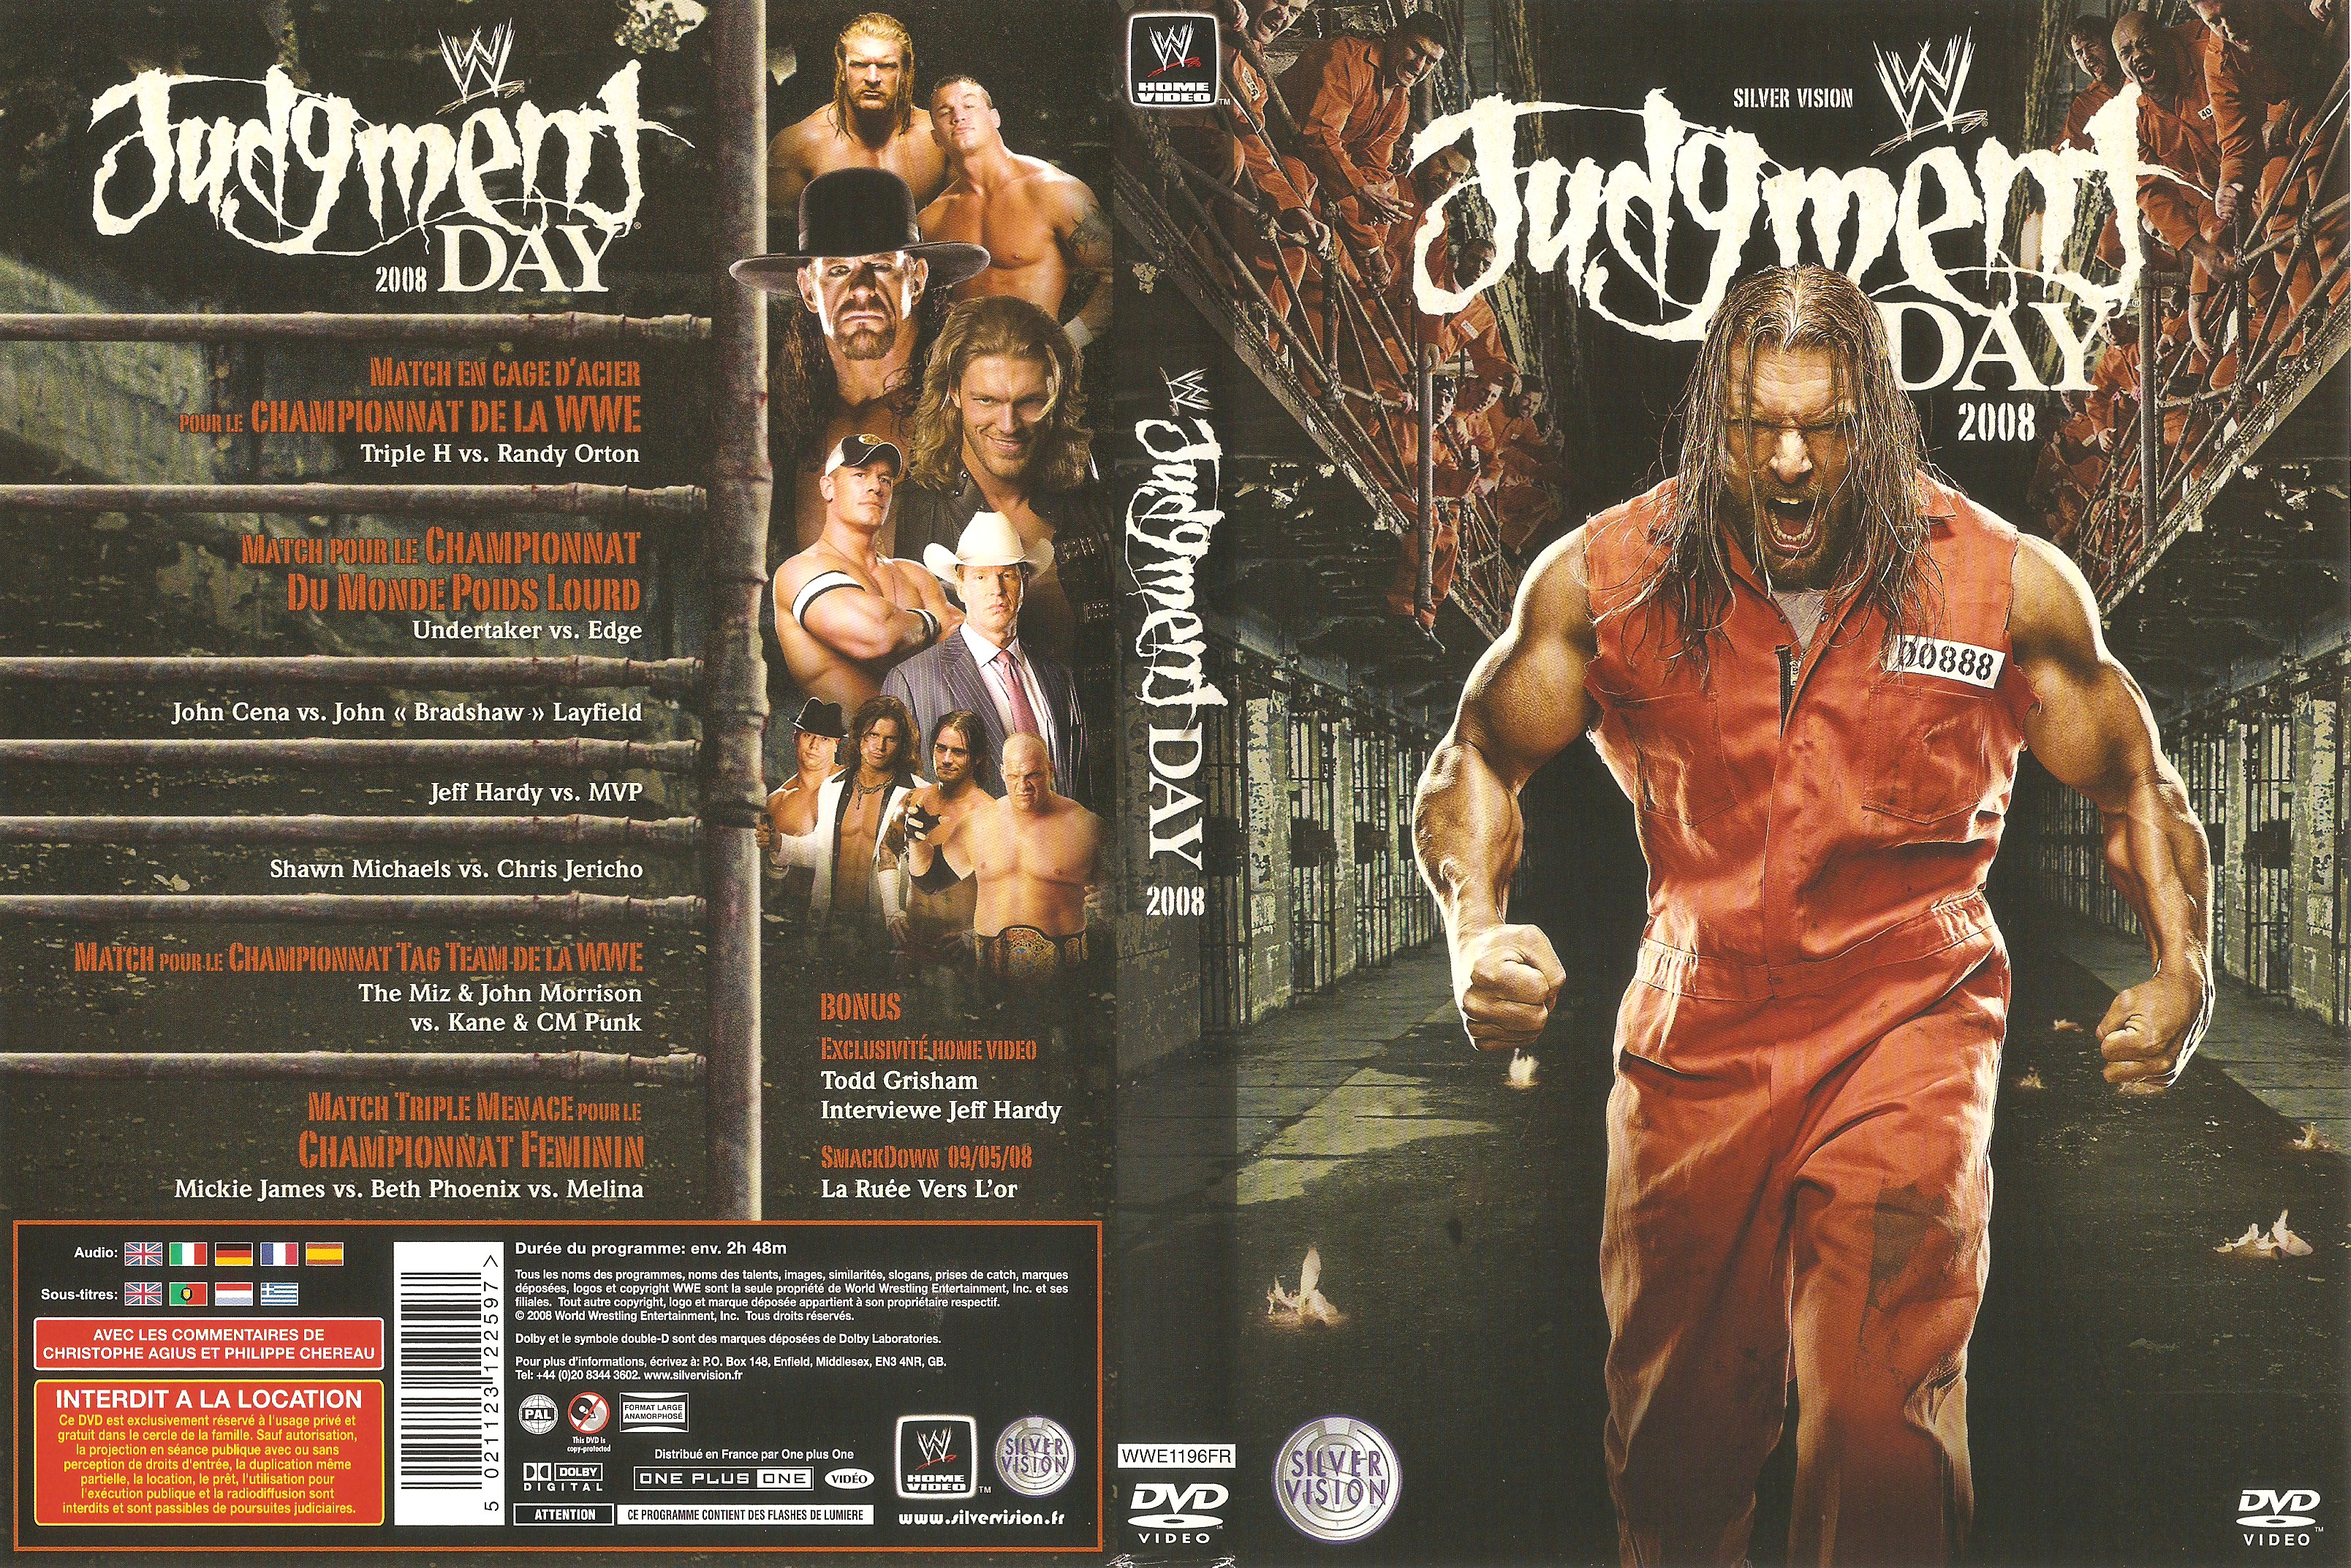 Jaquette DVD WWE Judgment Day 2008